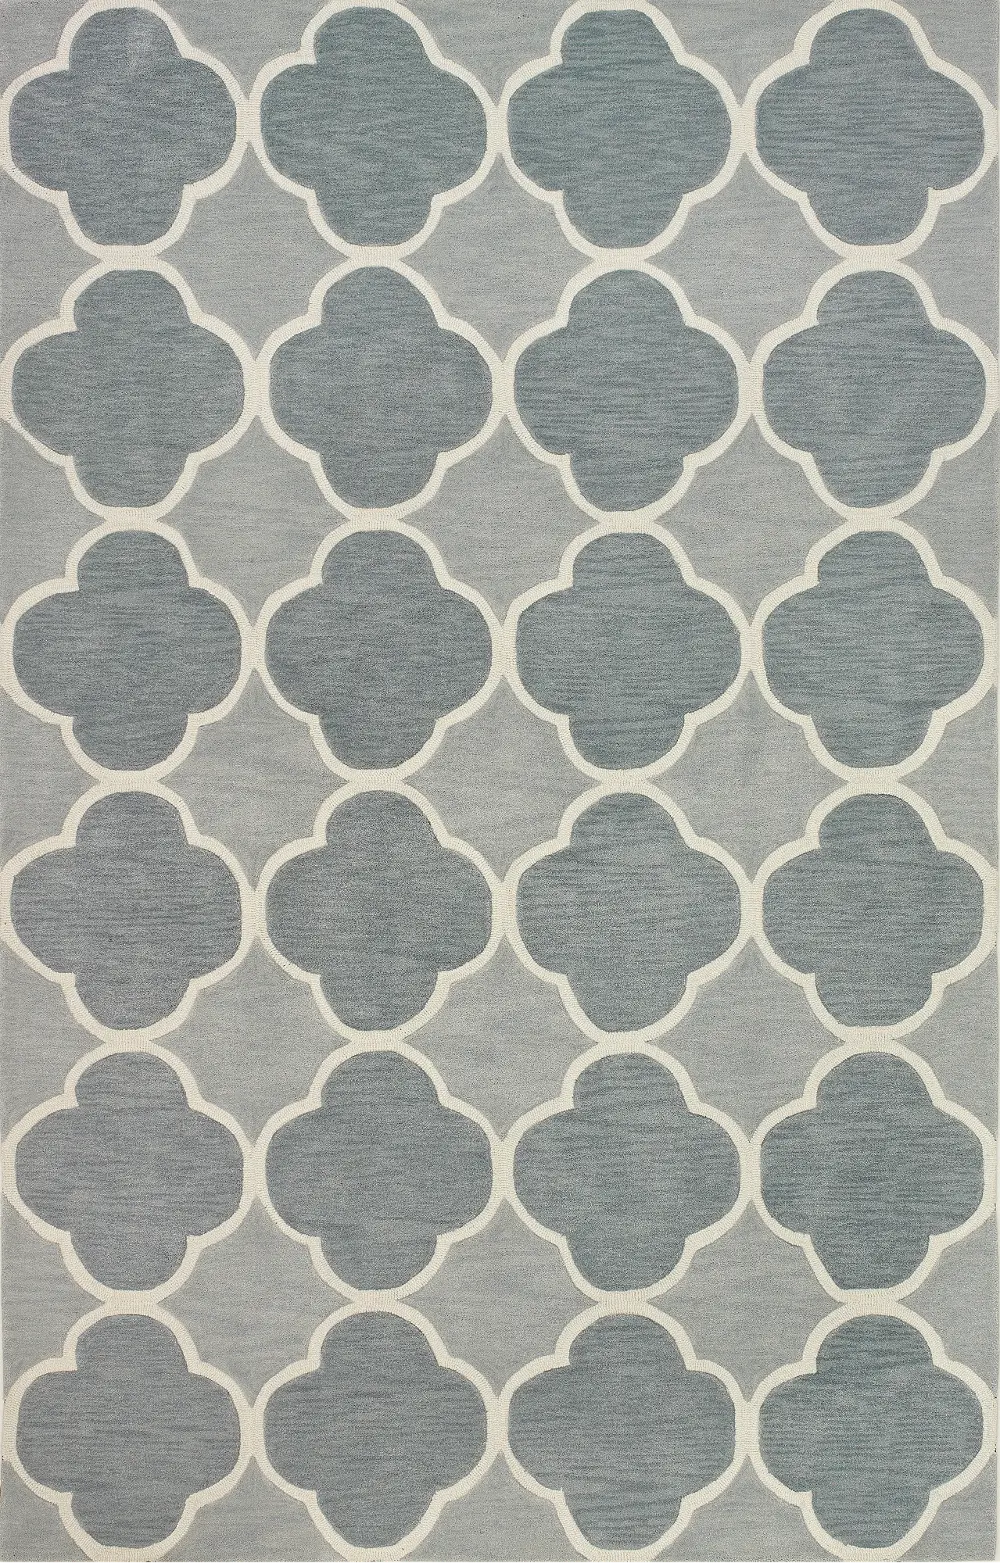 IF2SY8X10/GRYBLUERUG 8 x 10 Large Gray and Blue Rug - Infinity-1